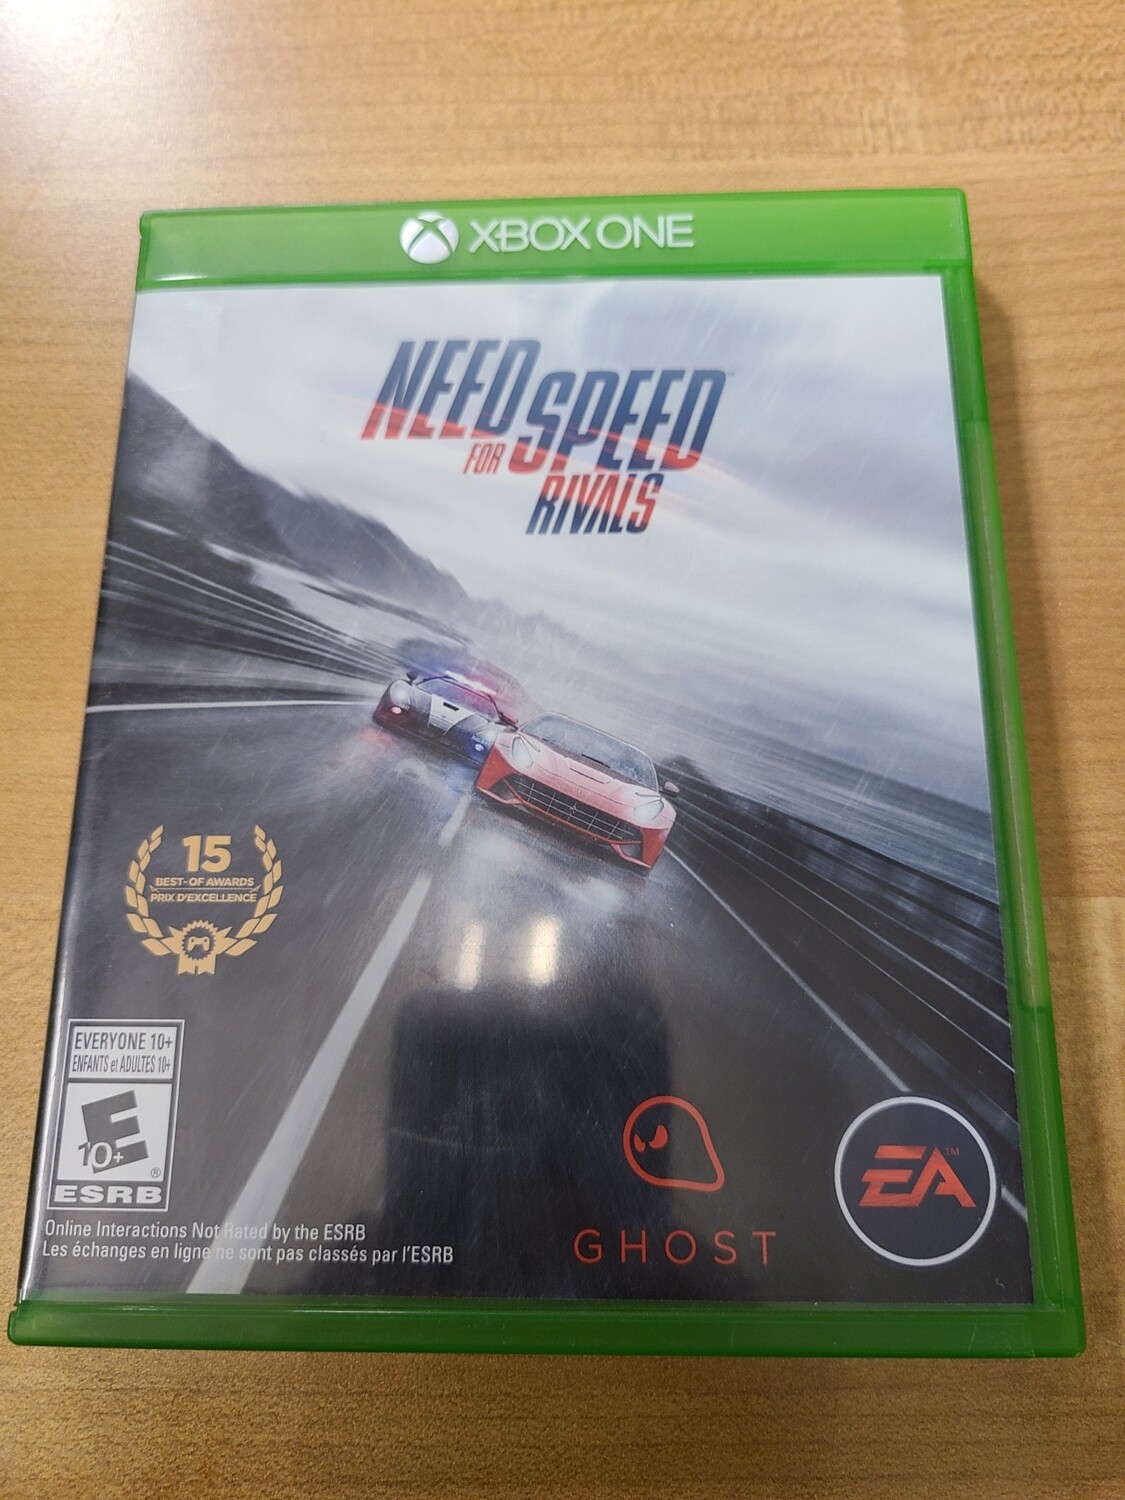 Need for Speed: Rivals - Xbox One